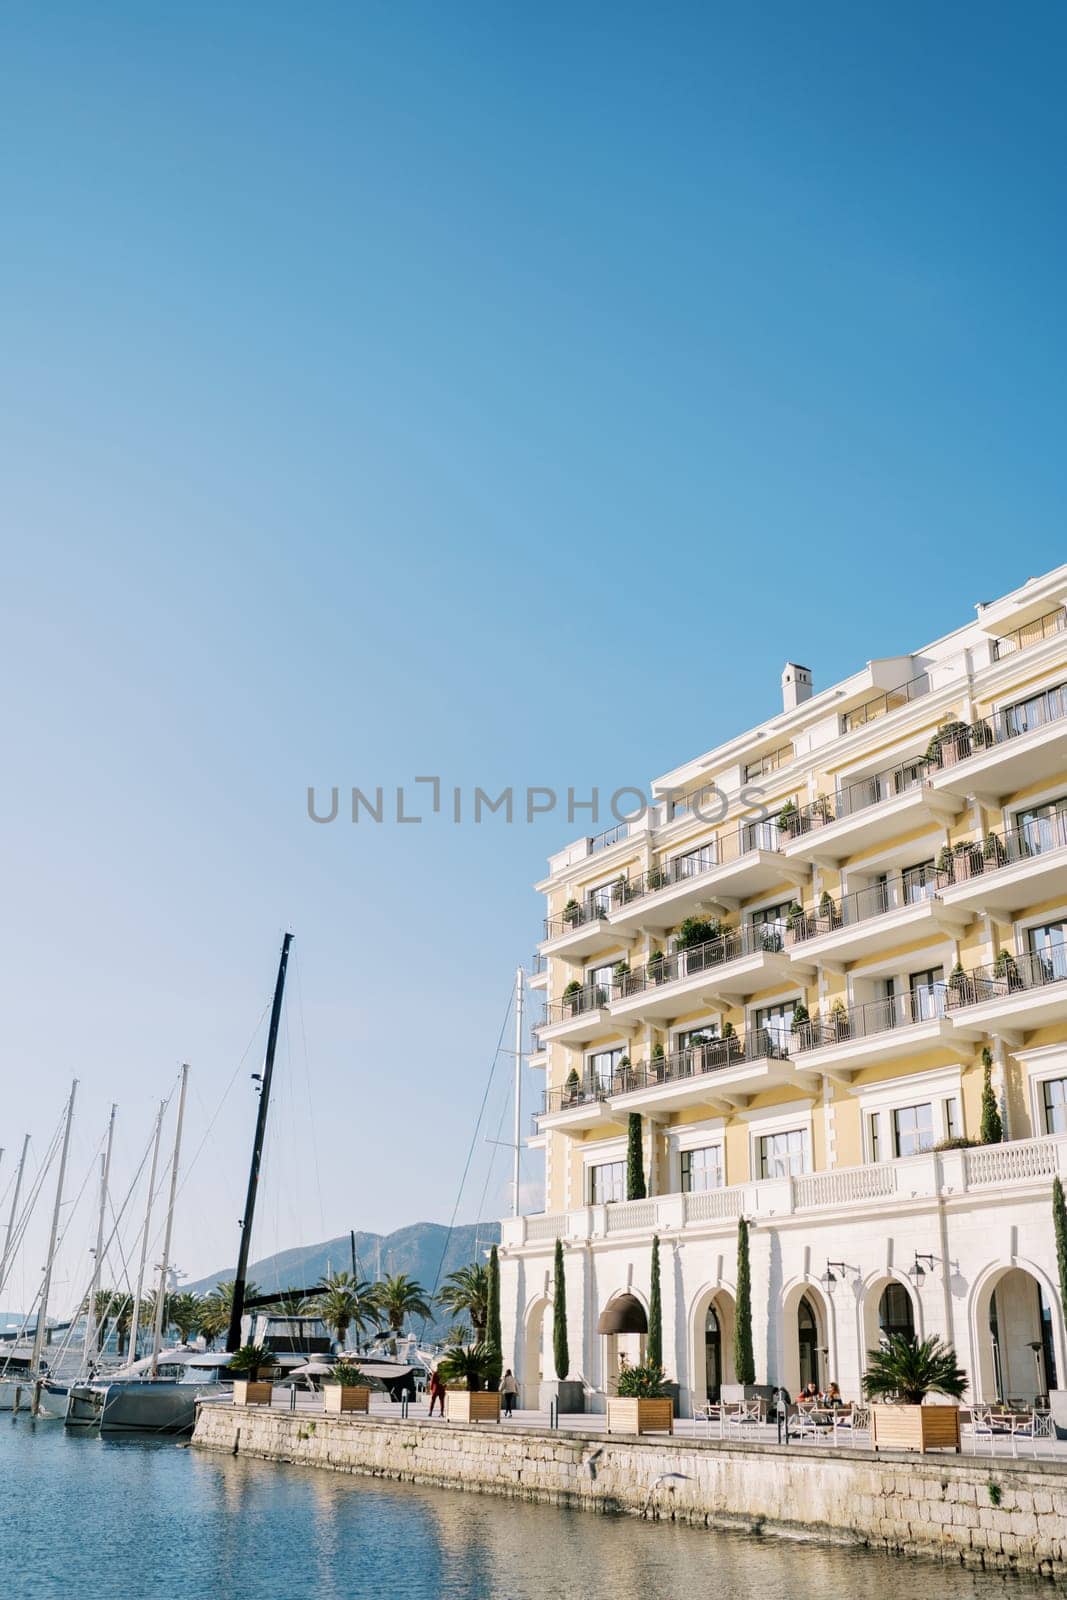 Luxurious Regent Hotel on the seafront next to moored sailing yachts. Porto, Montenegro by Nadtochiy